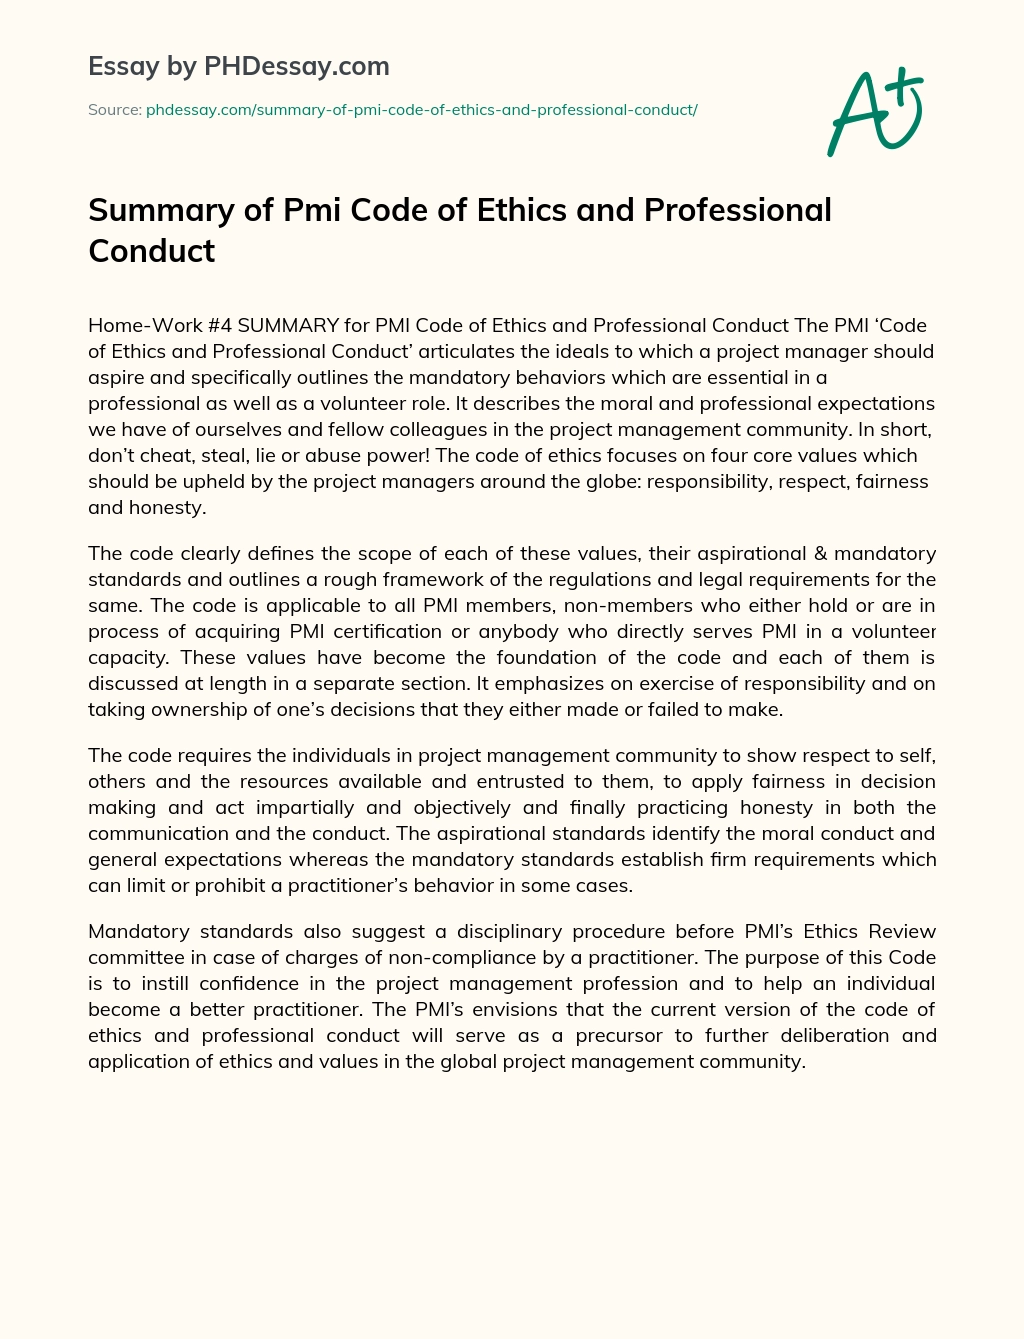 Summary of Pmi Code of Ethics and Professional Conduct essay